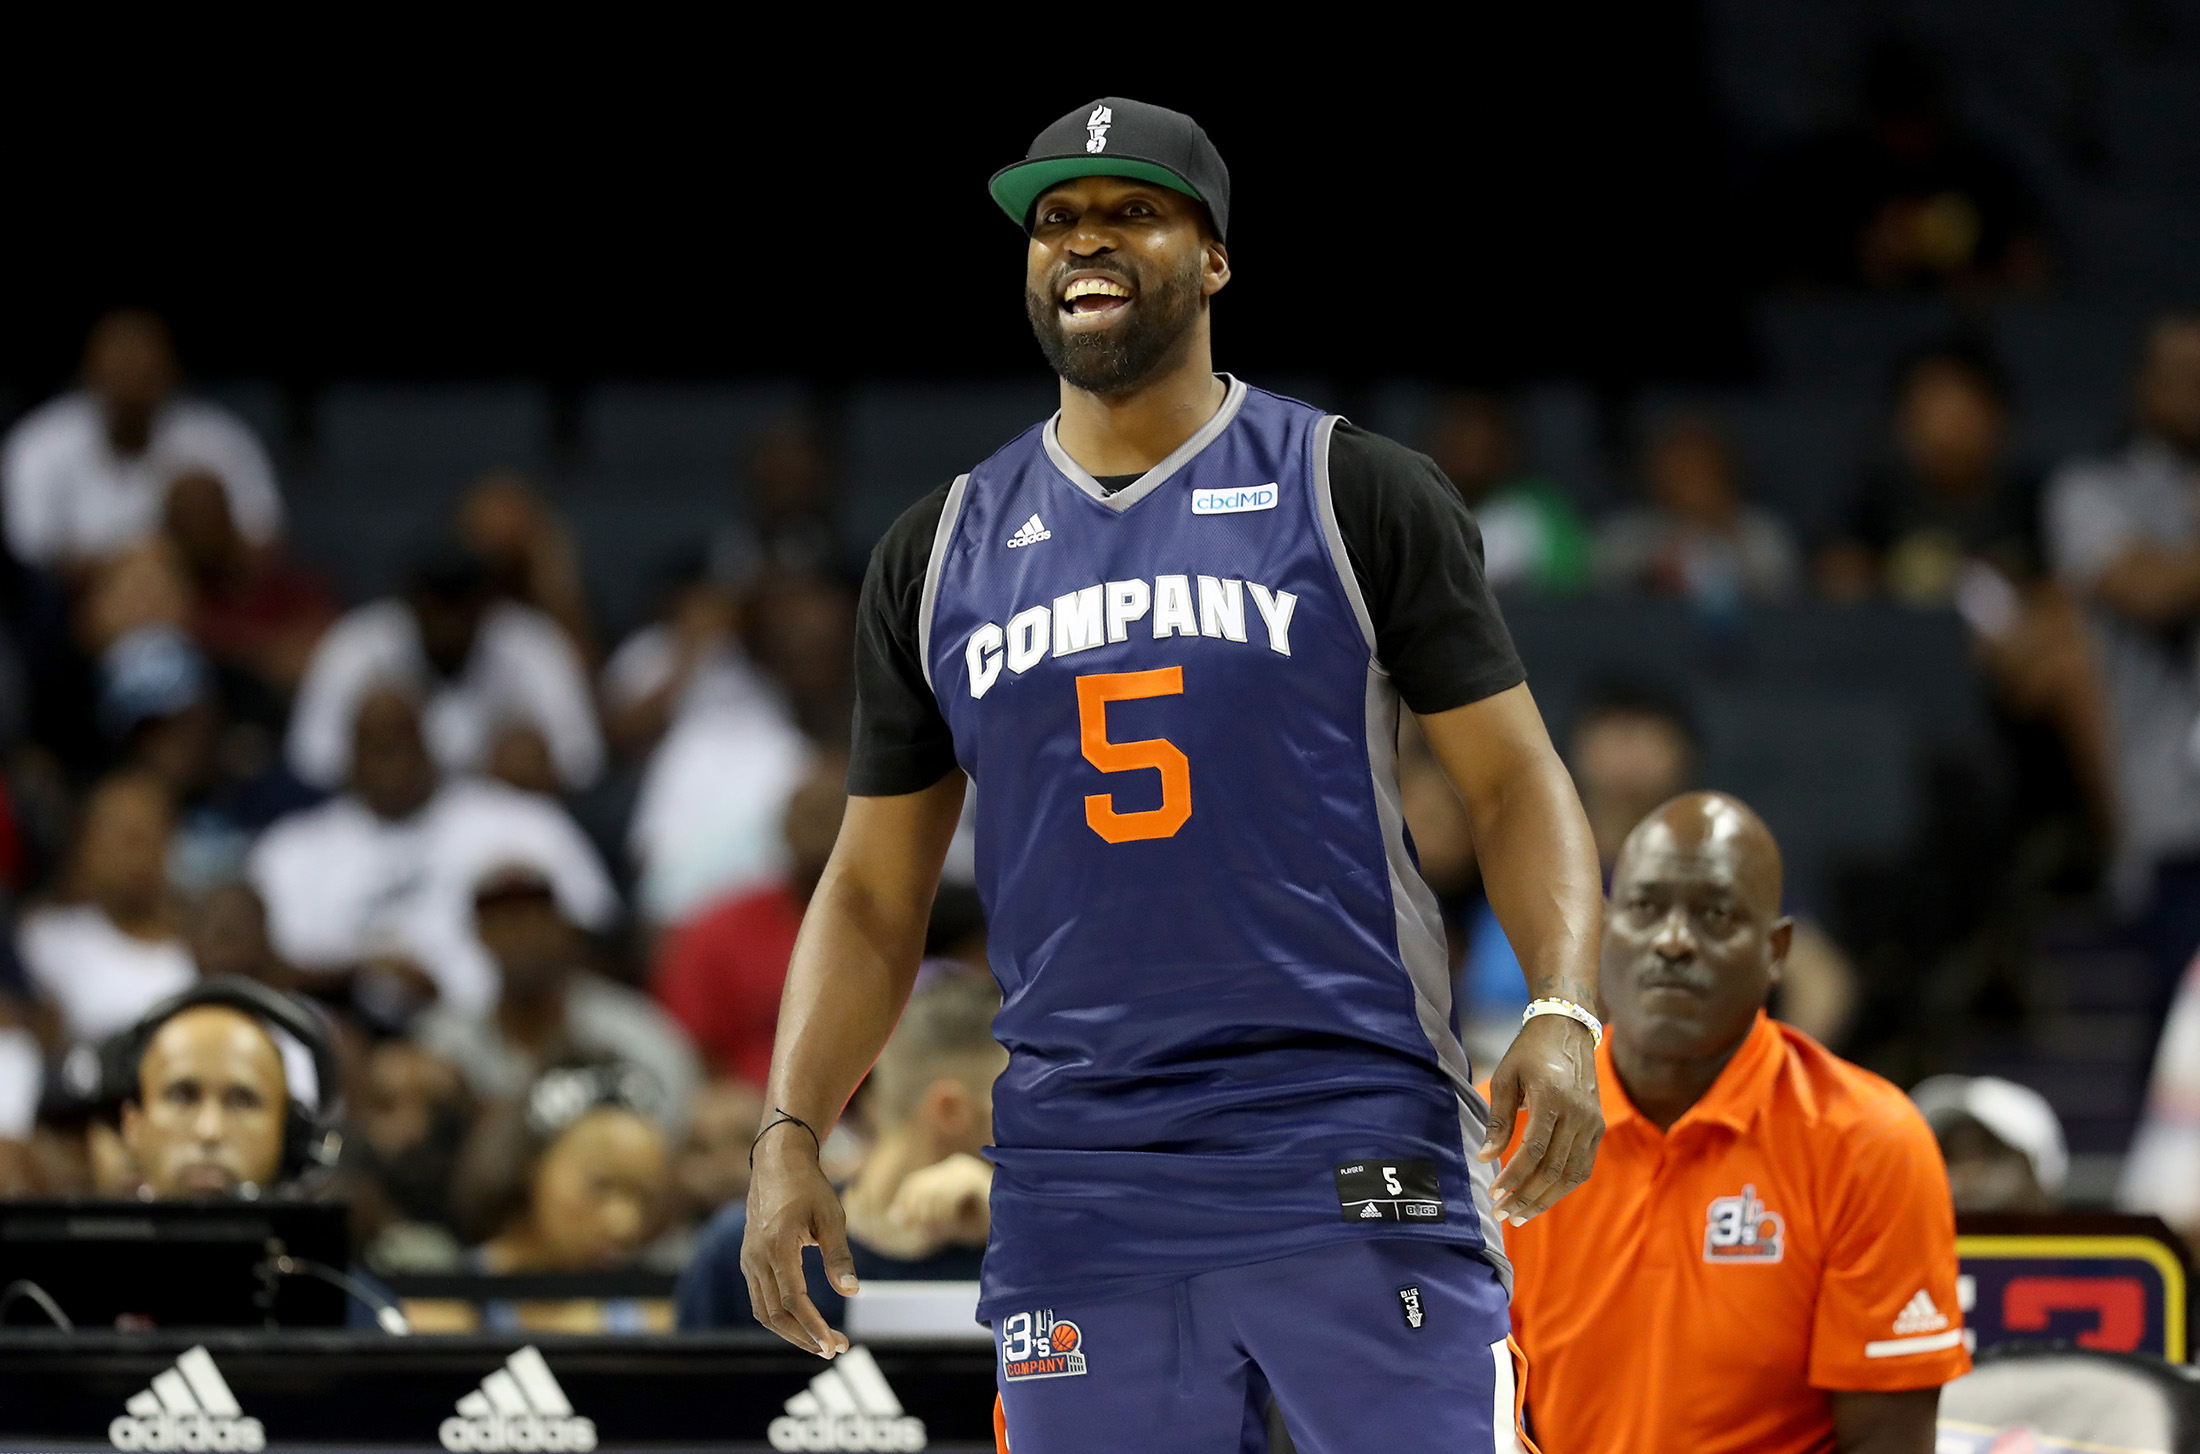 Ex Nba Star Baron Davis Said To Join Frenzy With Bull Horn Spac Bloomberg